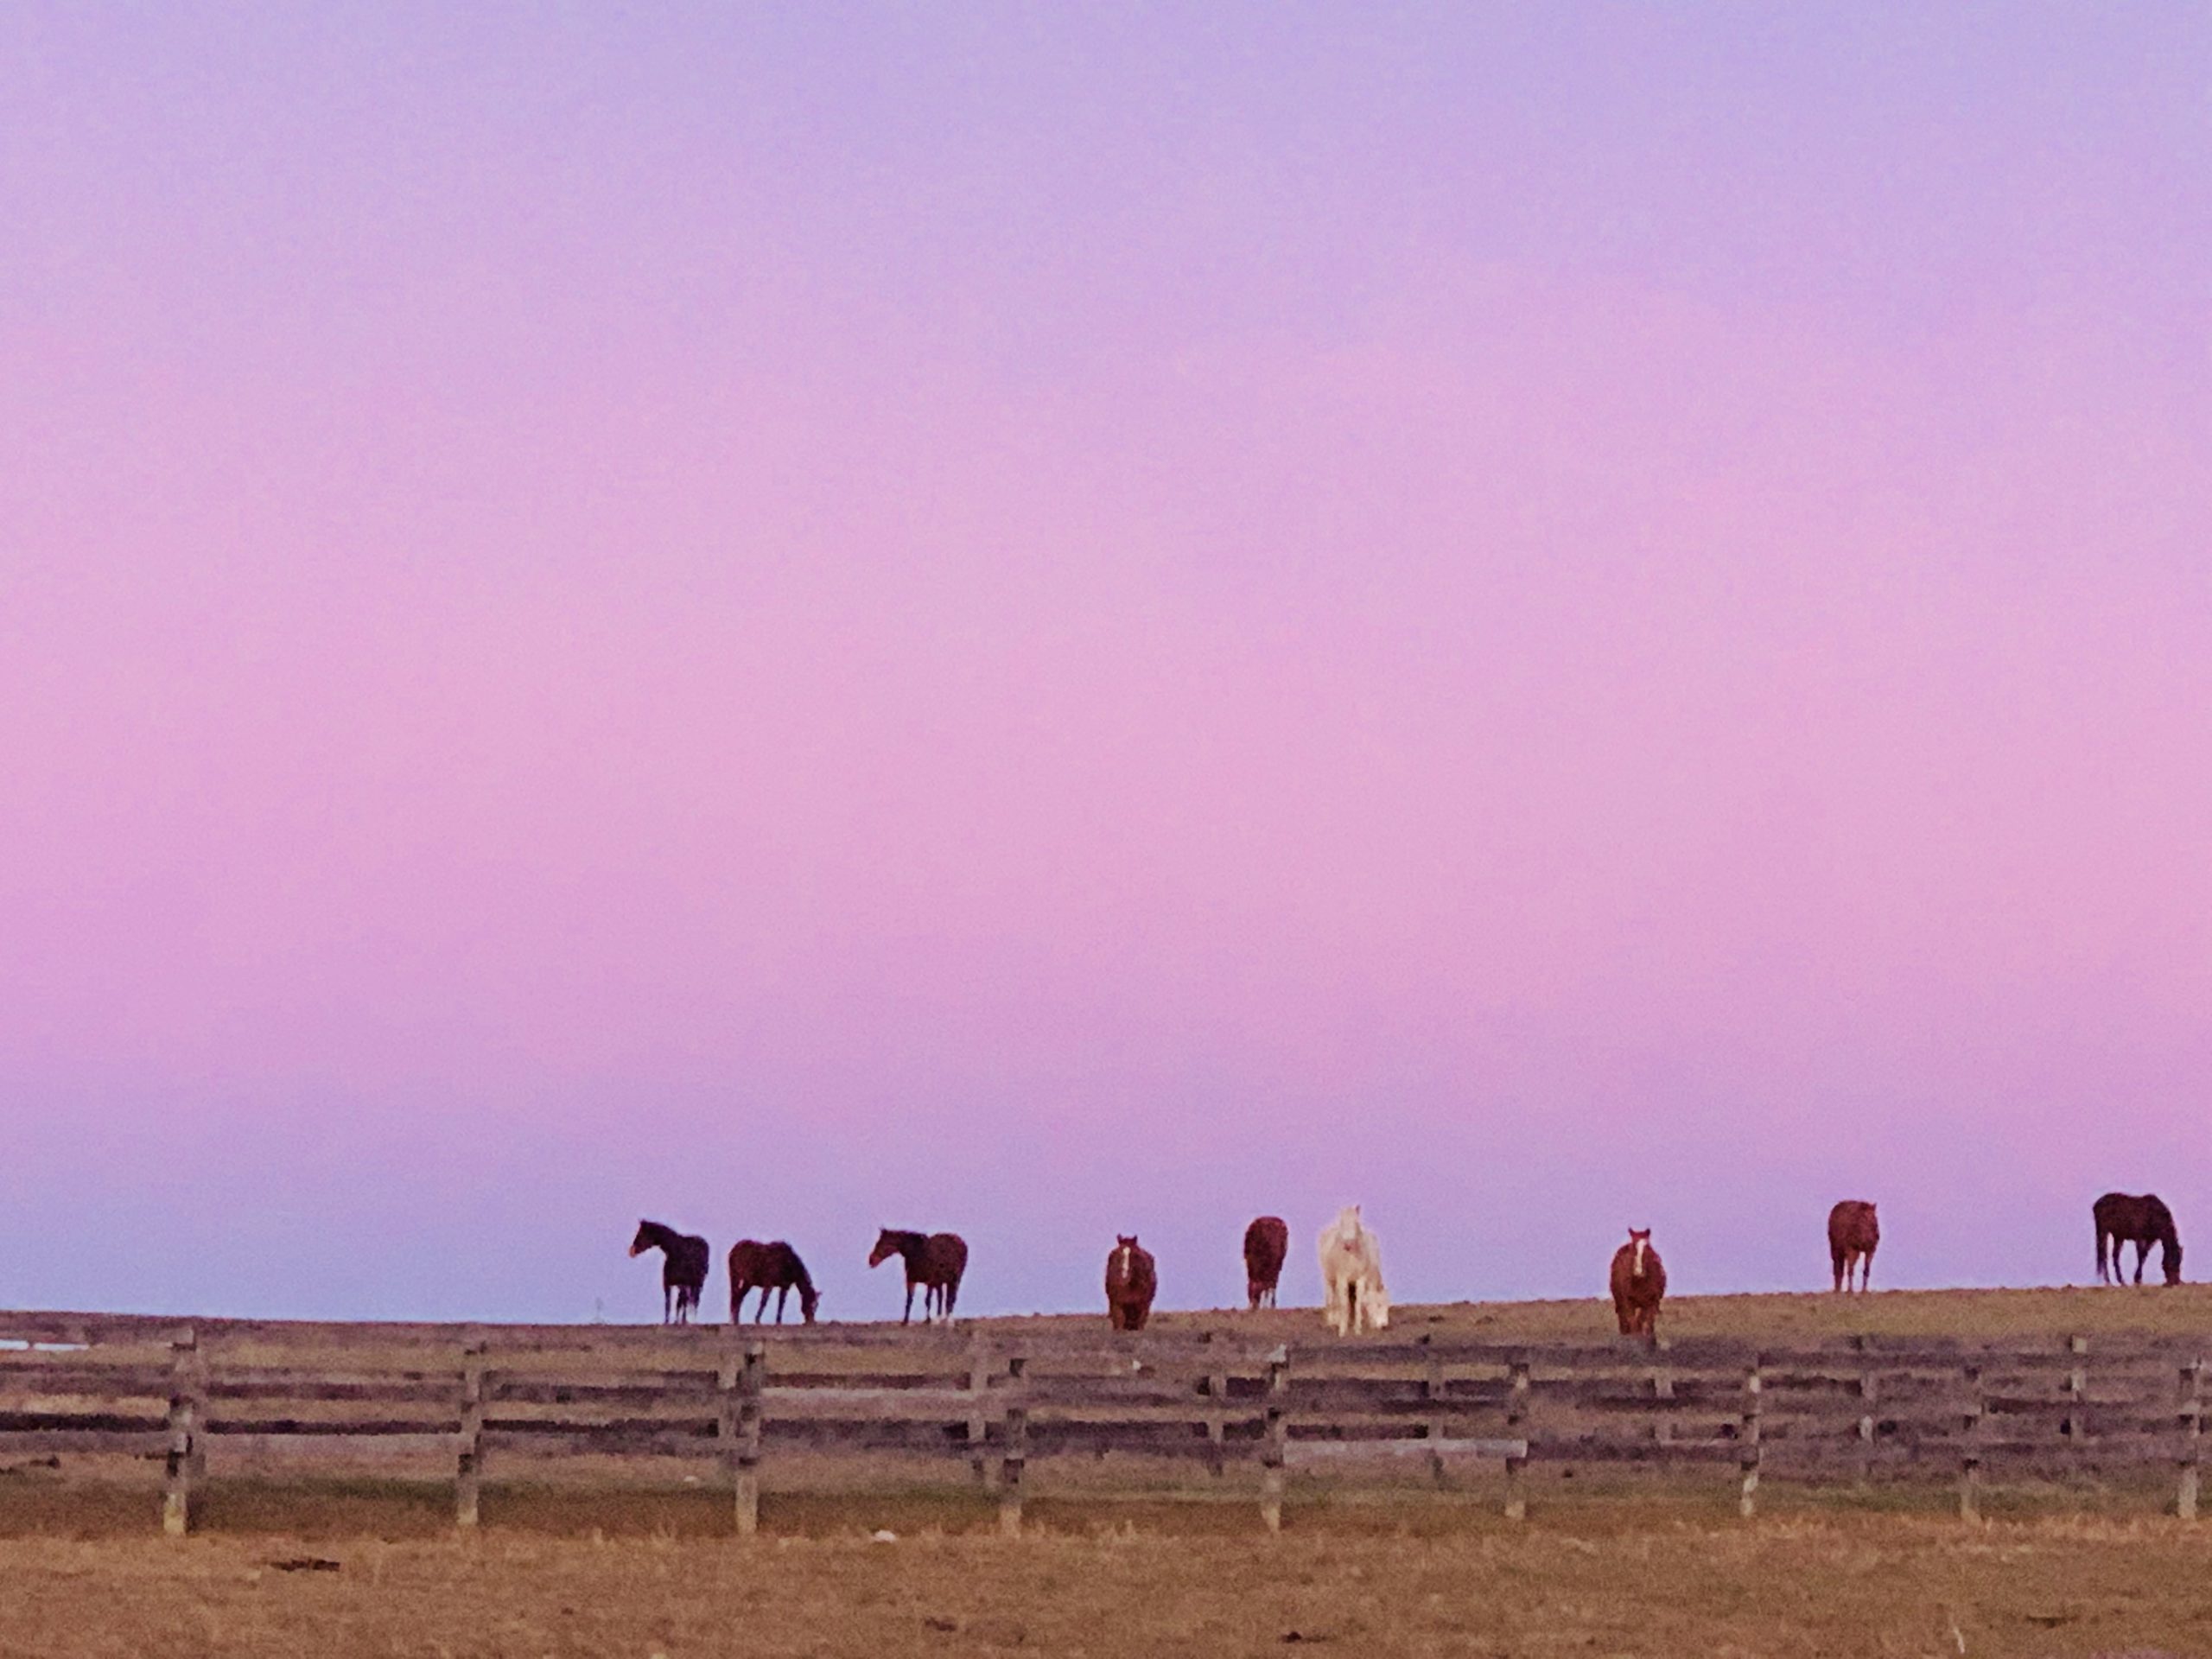 Some of our sanctuary mares grazing at sunrise. They have found a safe place to land with their forever home at Foxie G.